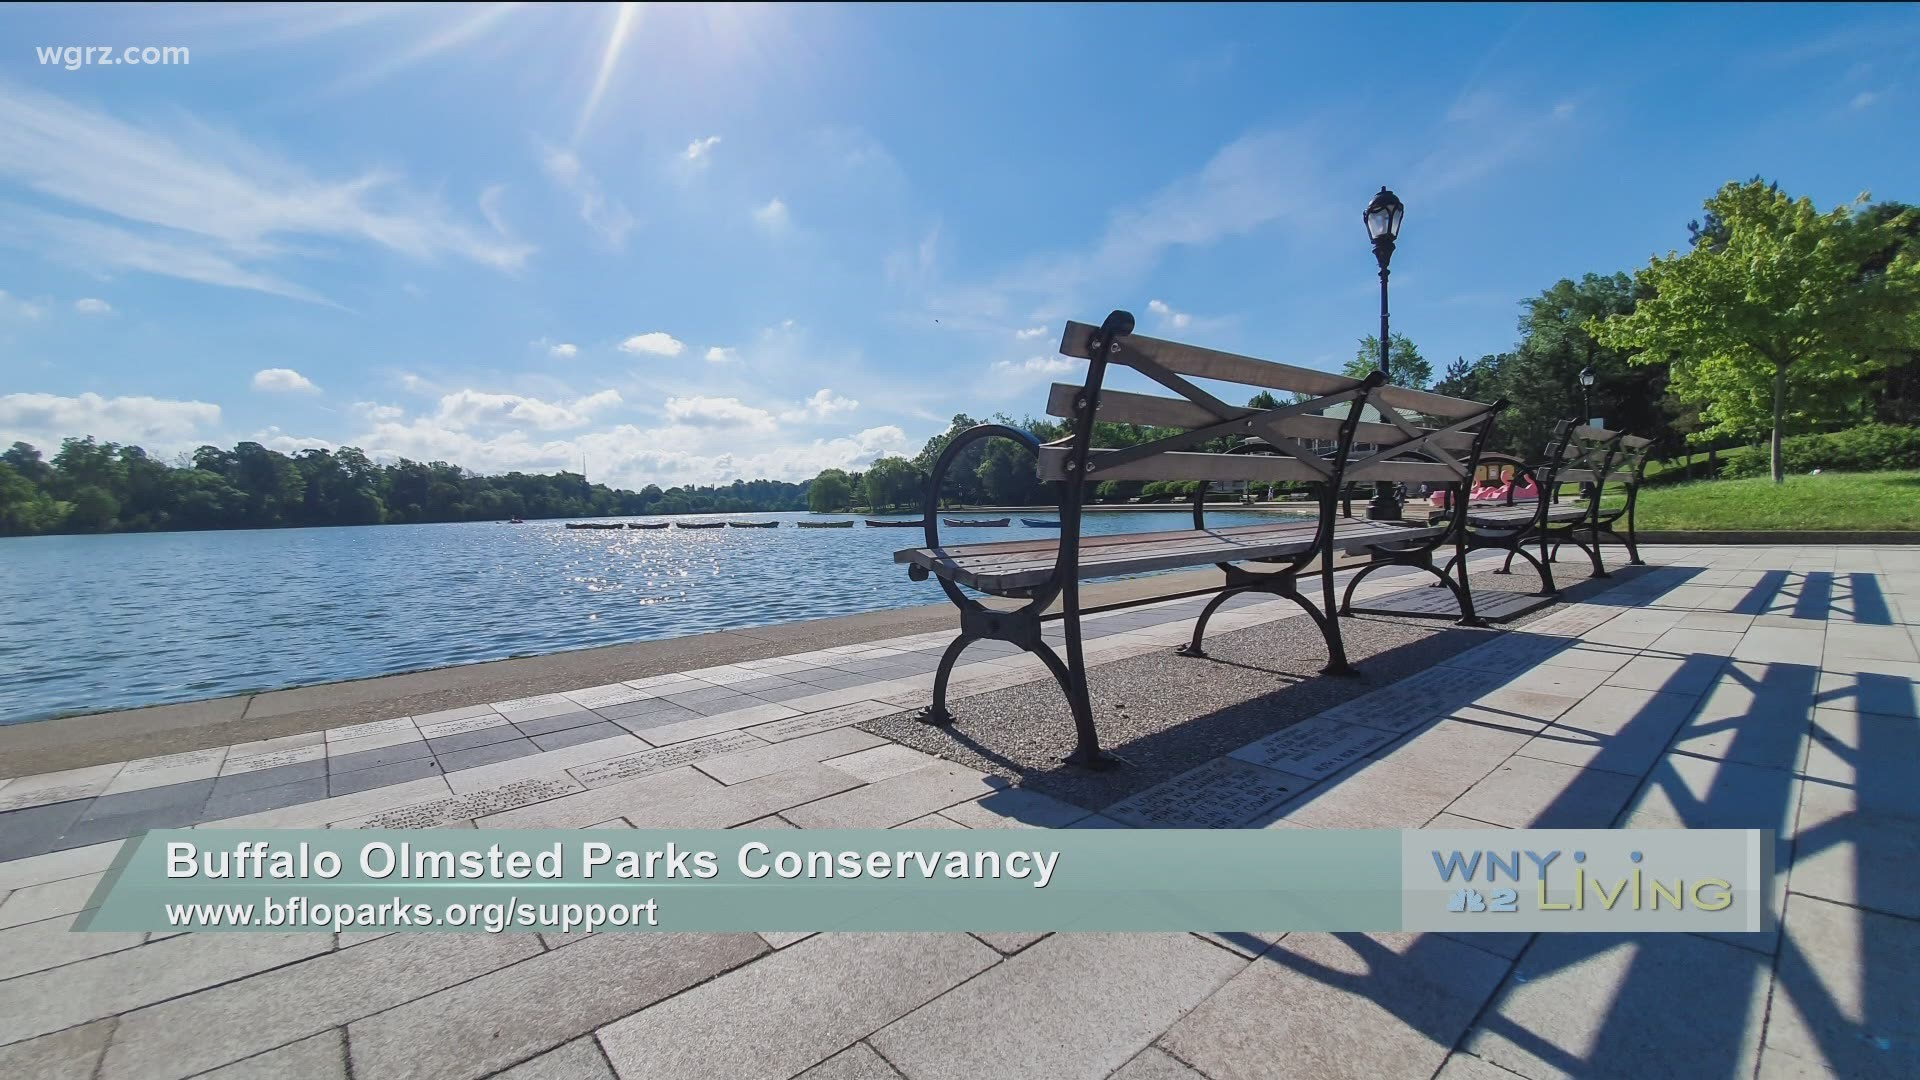 WNY Living - December 12 - Buffalo Olmsted Parks Conservancy (THIS VIDEO IS SPONSORED BY BUFFALO OLMSTED PARKS CONSERVANCY)